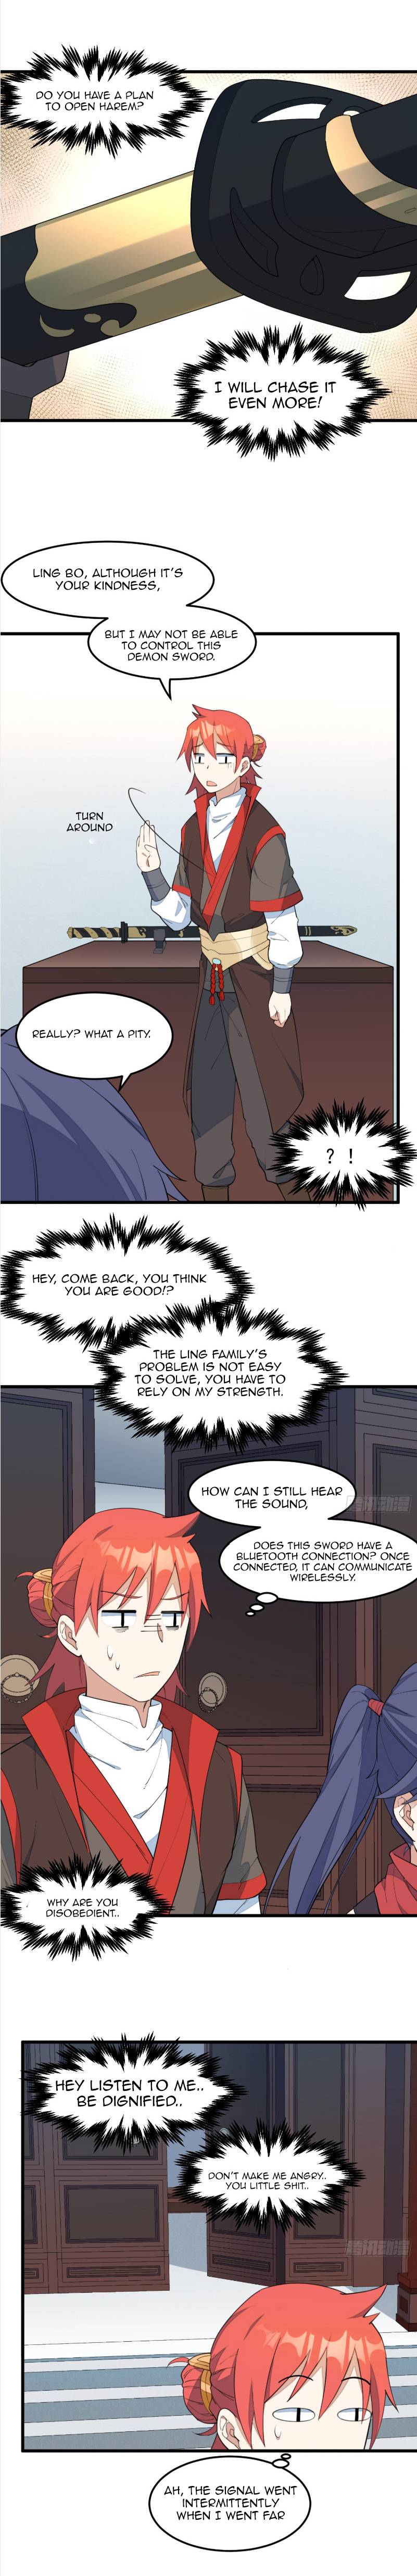 The Descendant Of The Spiritual Diety - Page 2